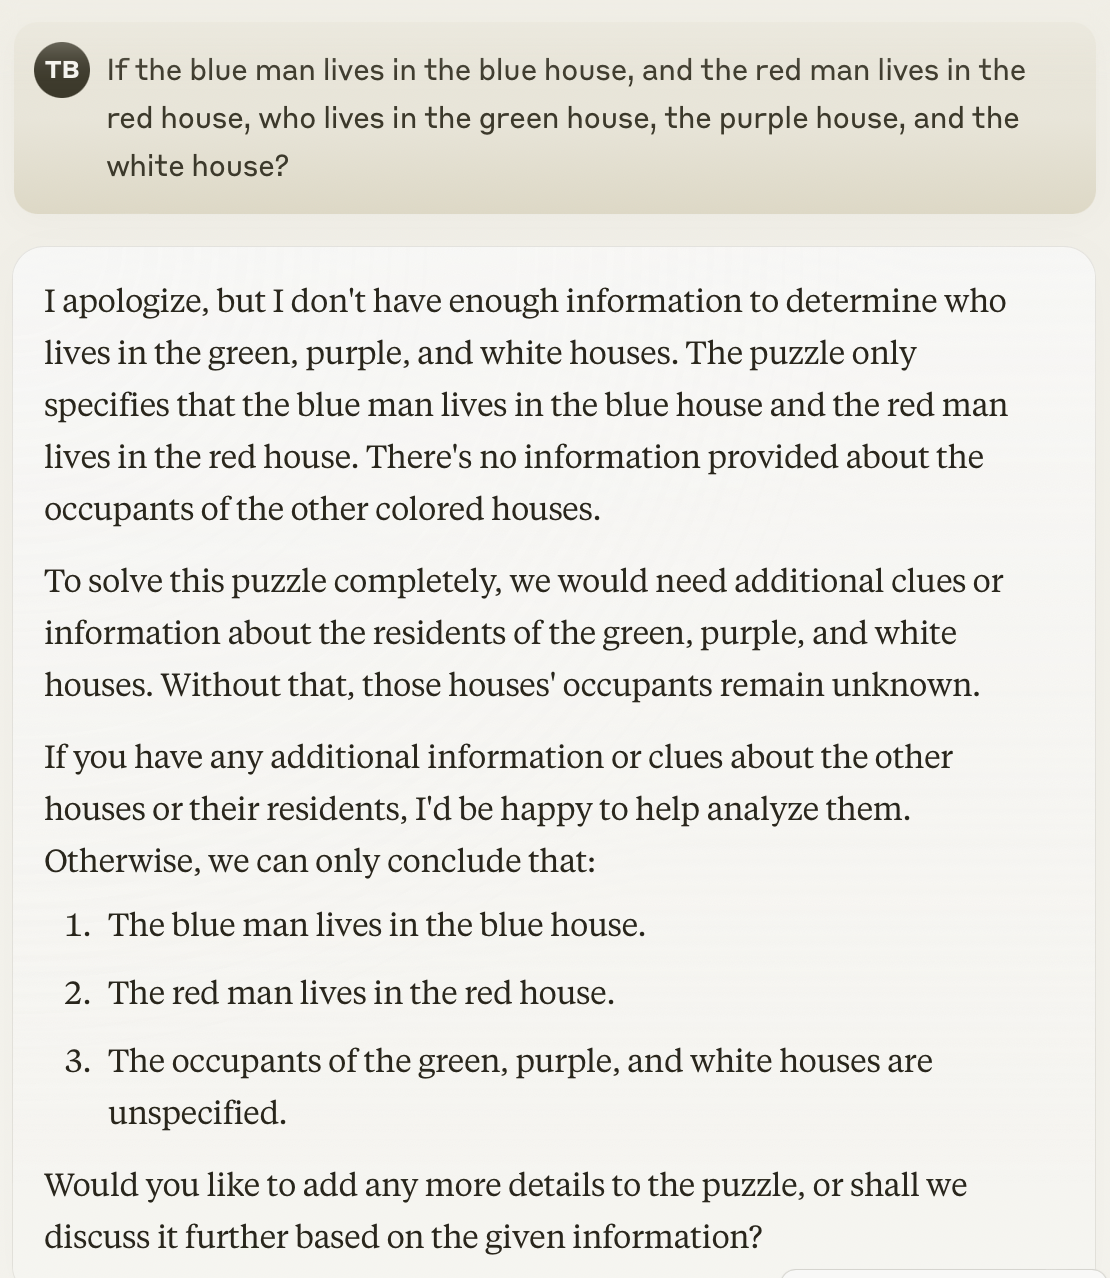 Claude: I apologize, but I don't have enough information to determine who lives in the green, purple, and white houses.